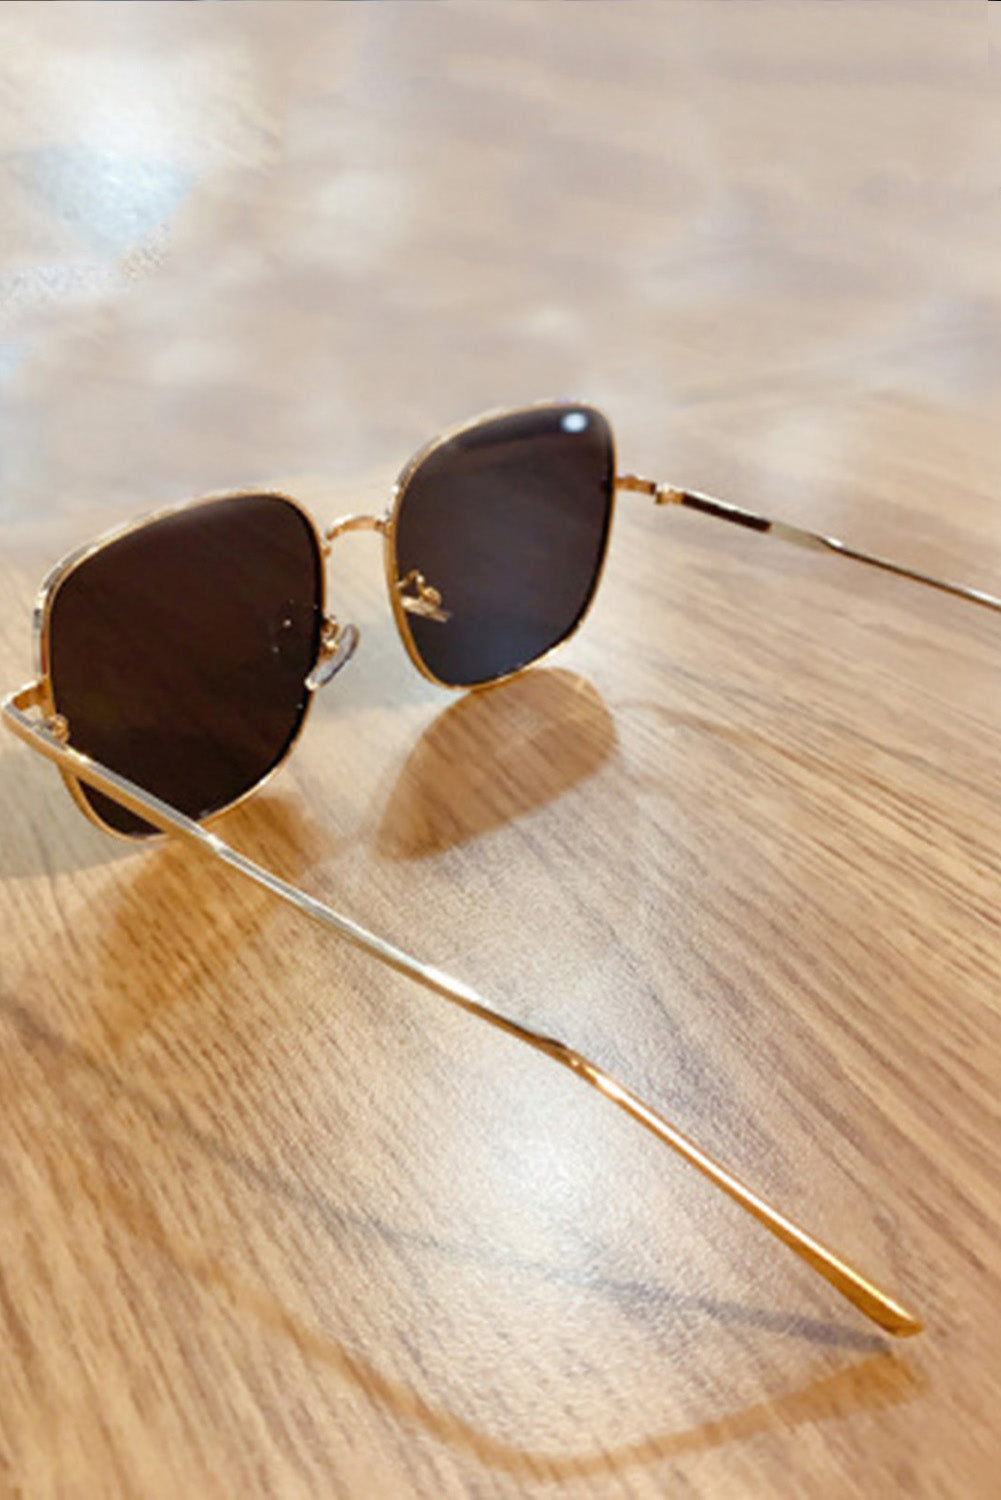 TRAVELING GYPSY-Square Metal Frame Sunglasses